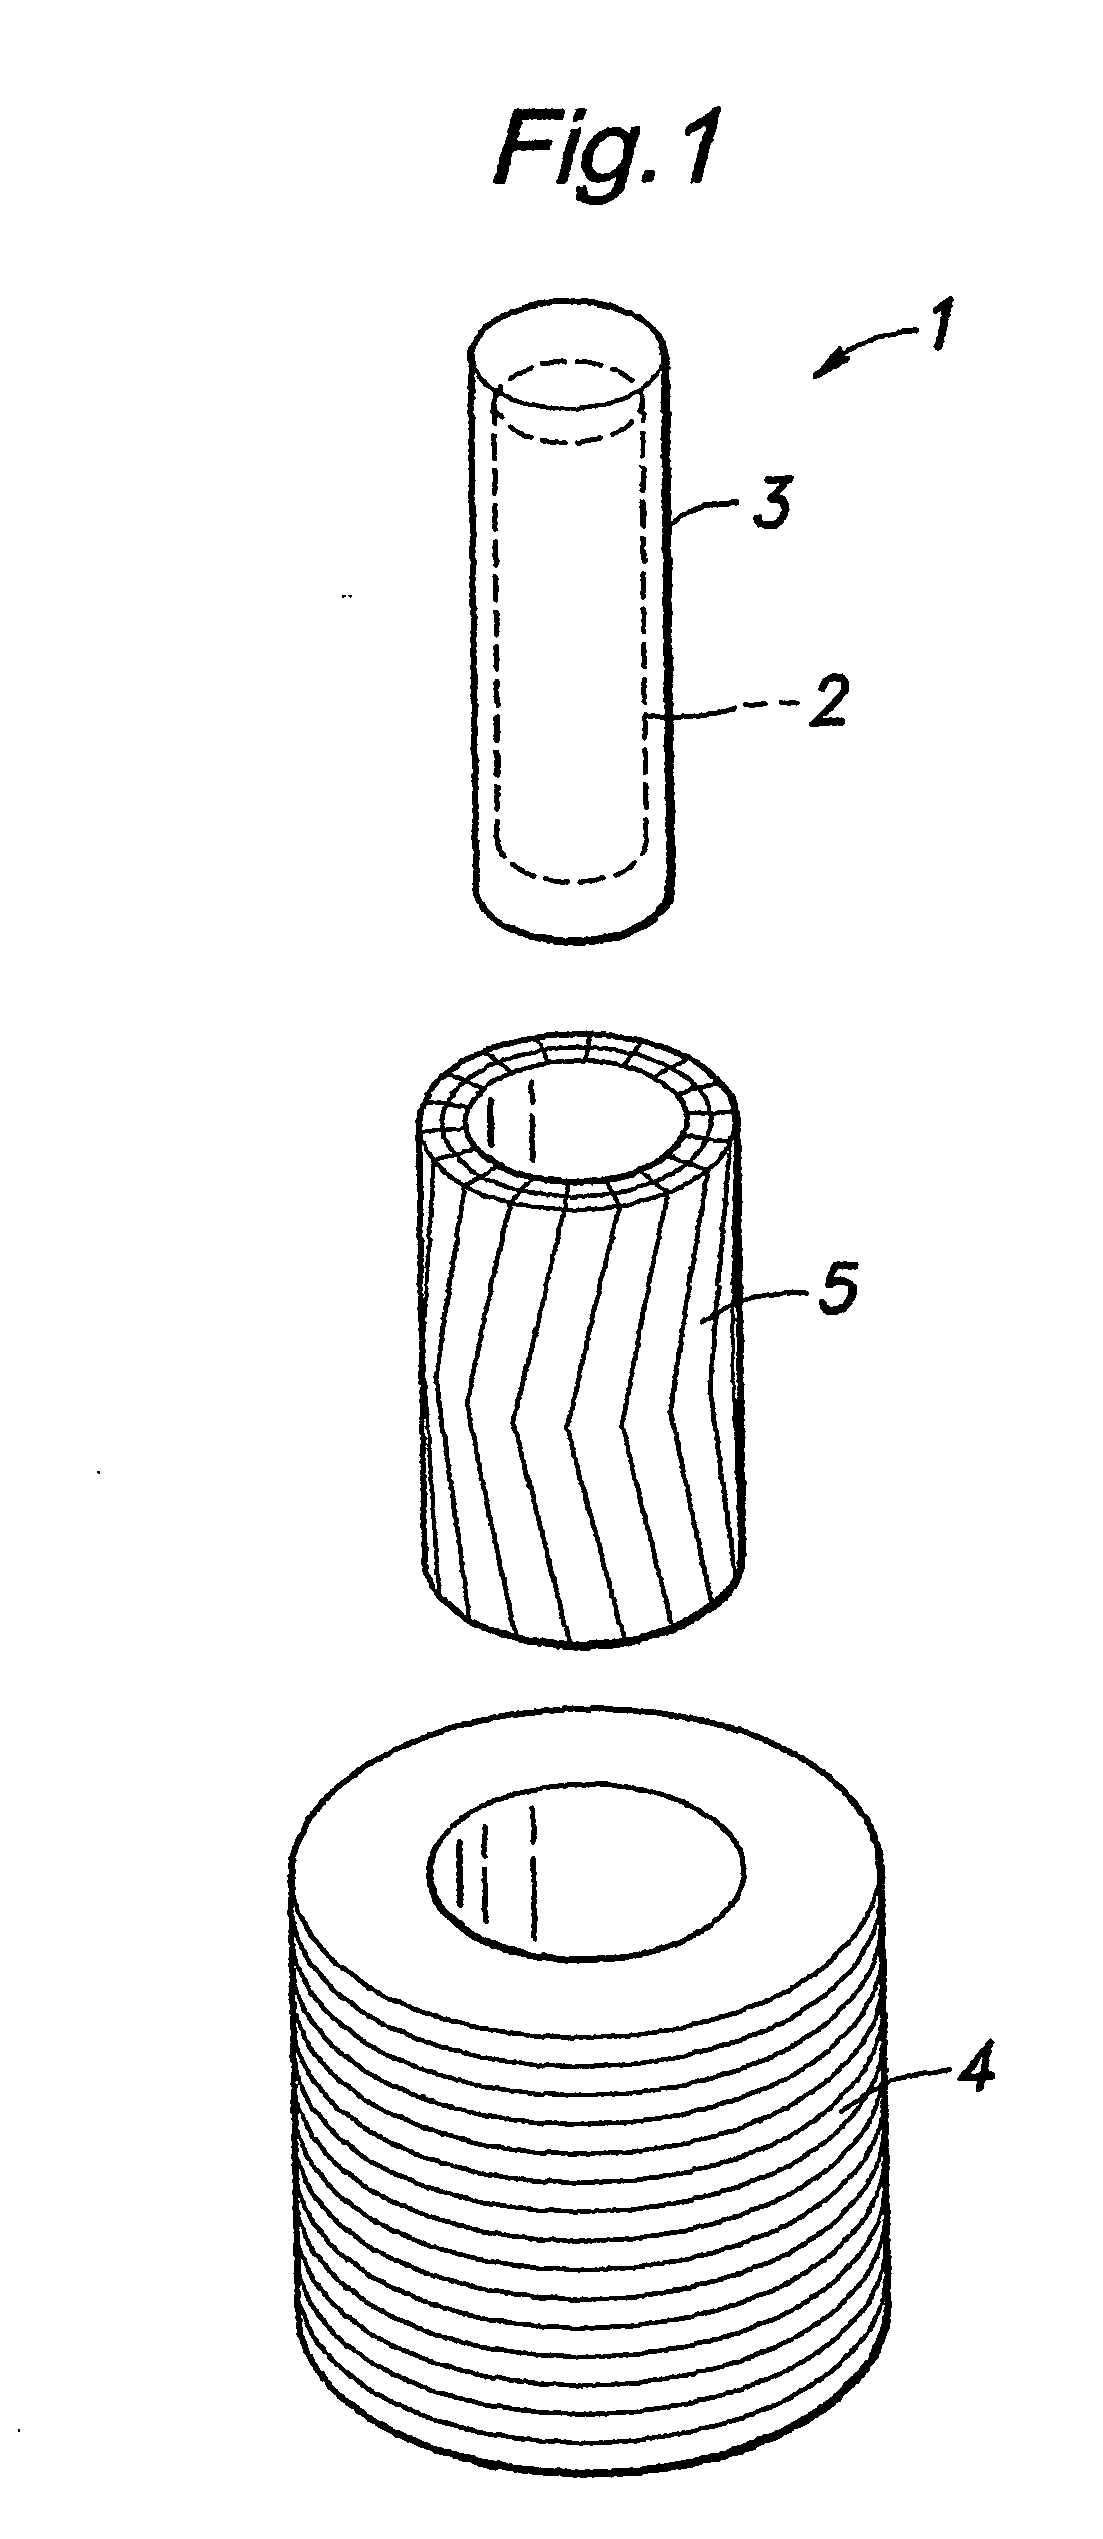 Slotless rotary electric machine and manufacturing method of coils for such a machine